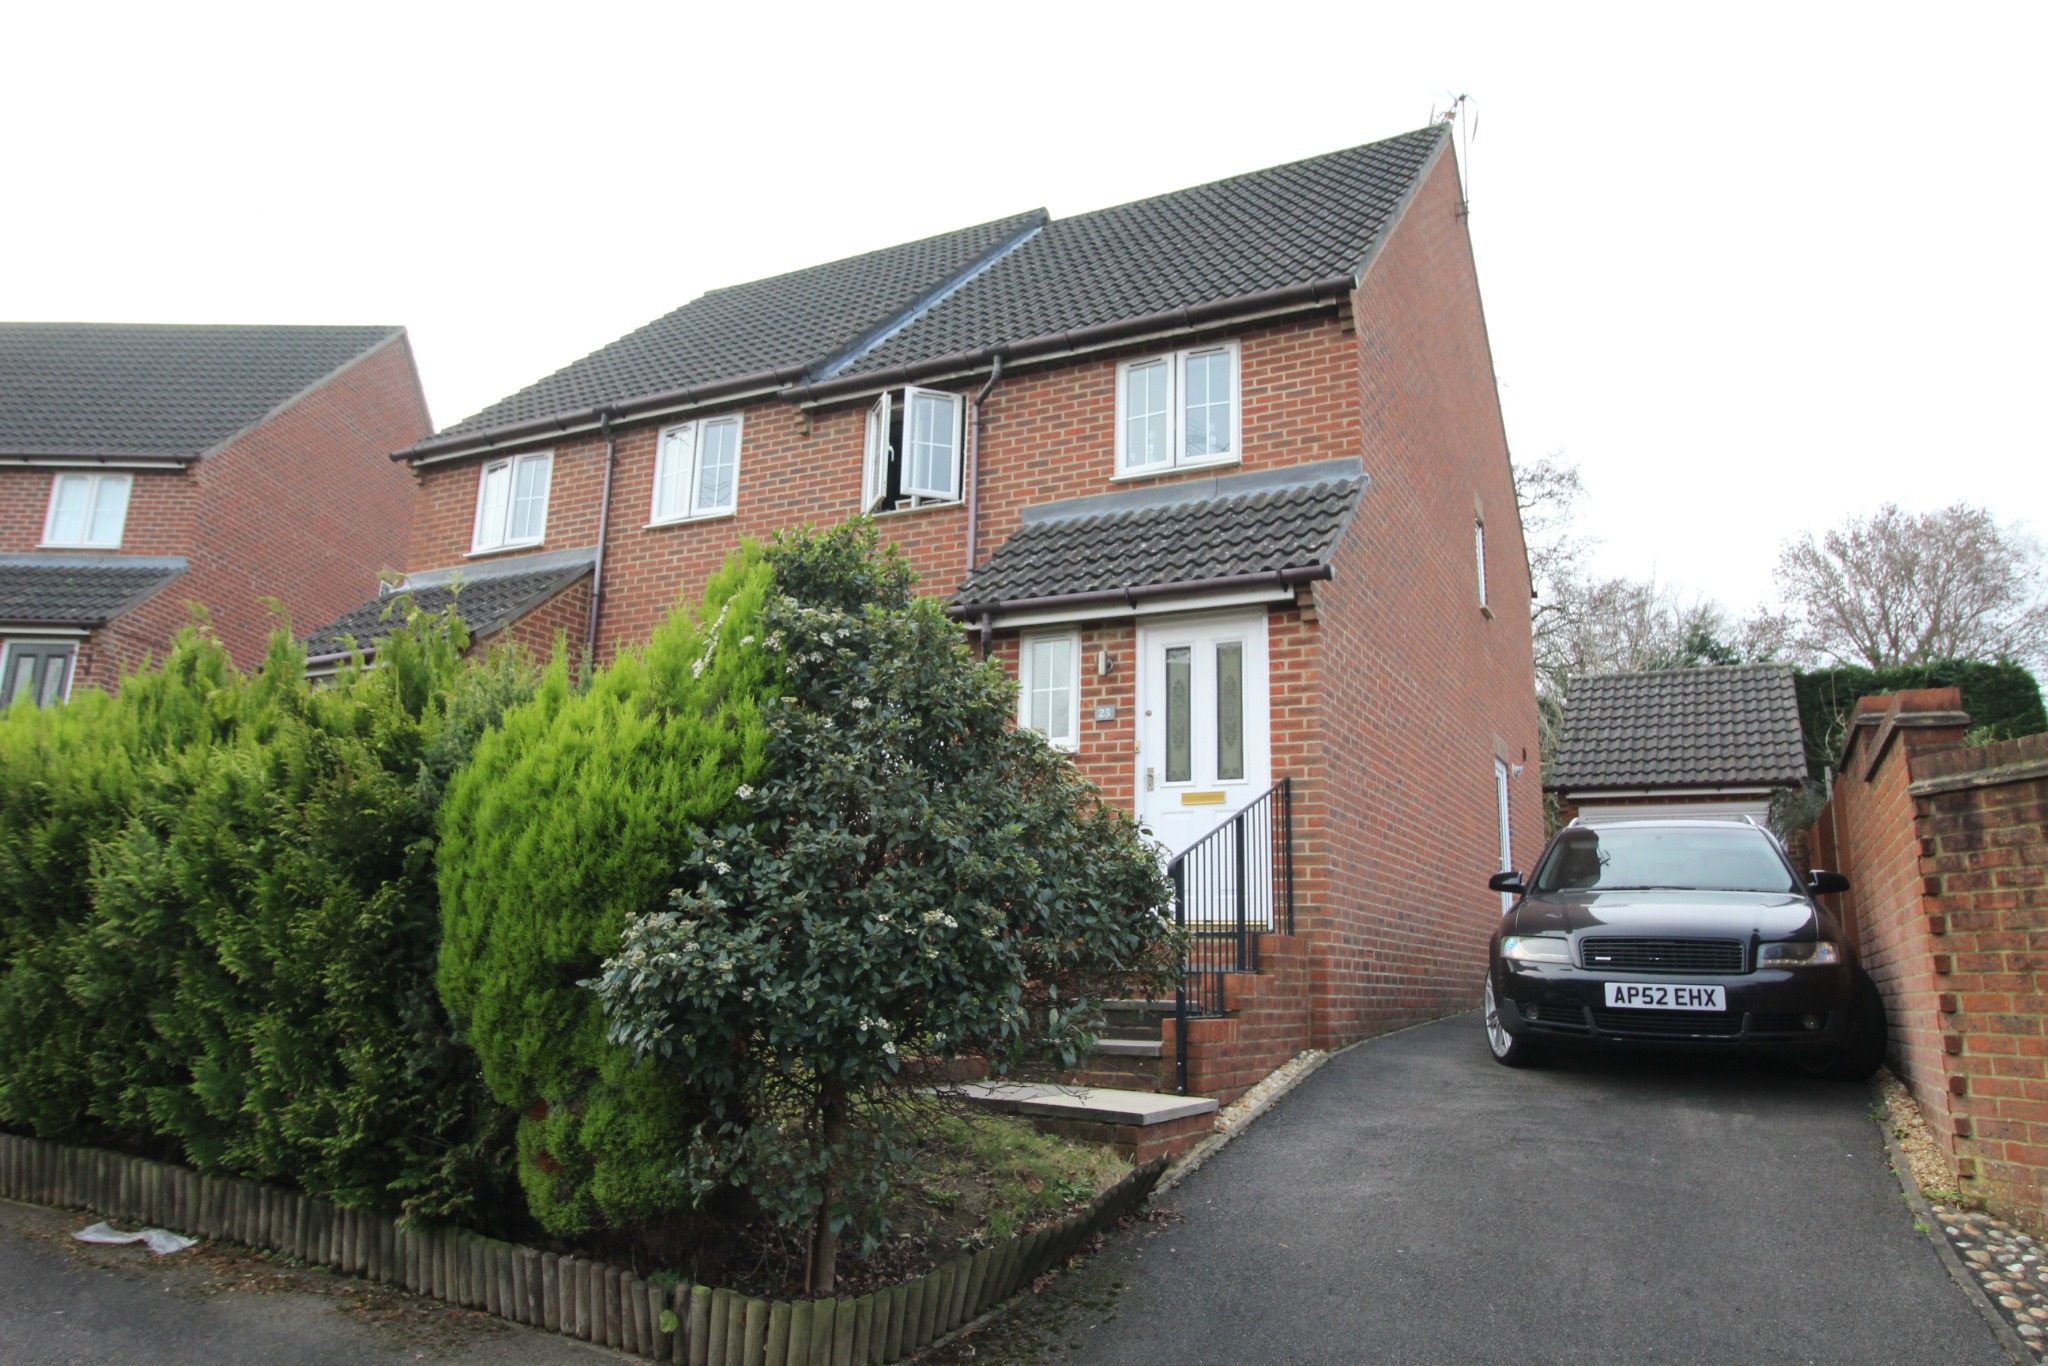 3 bed house to rent in Whiteley, Fareham - Property Image 1